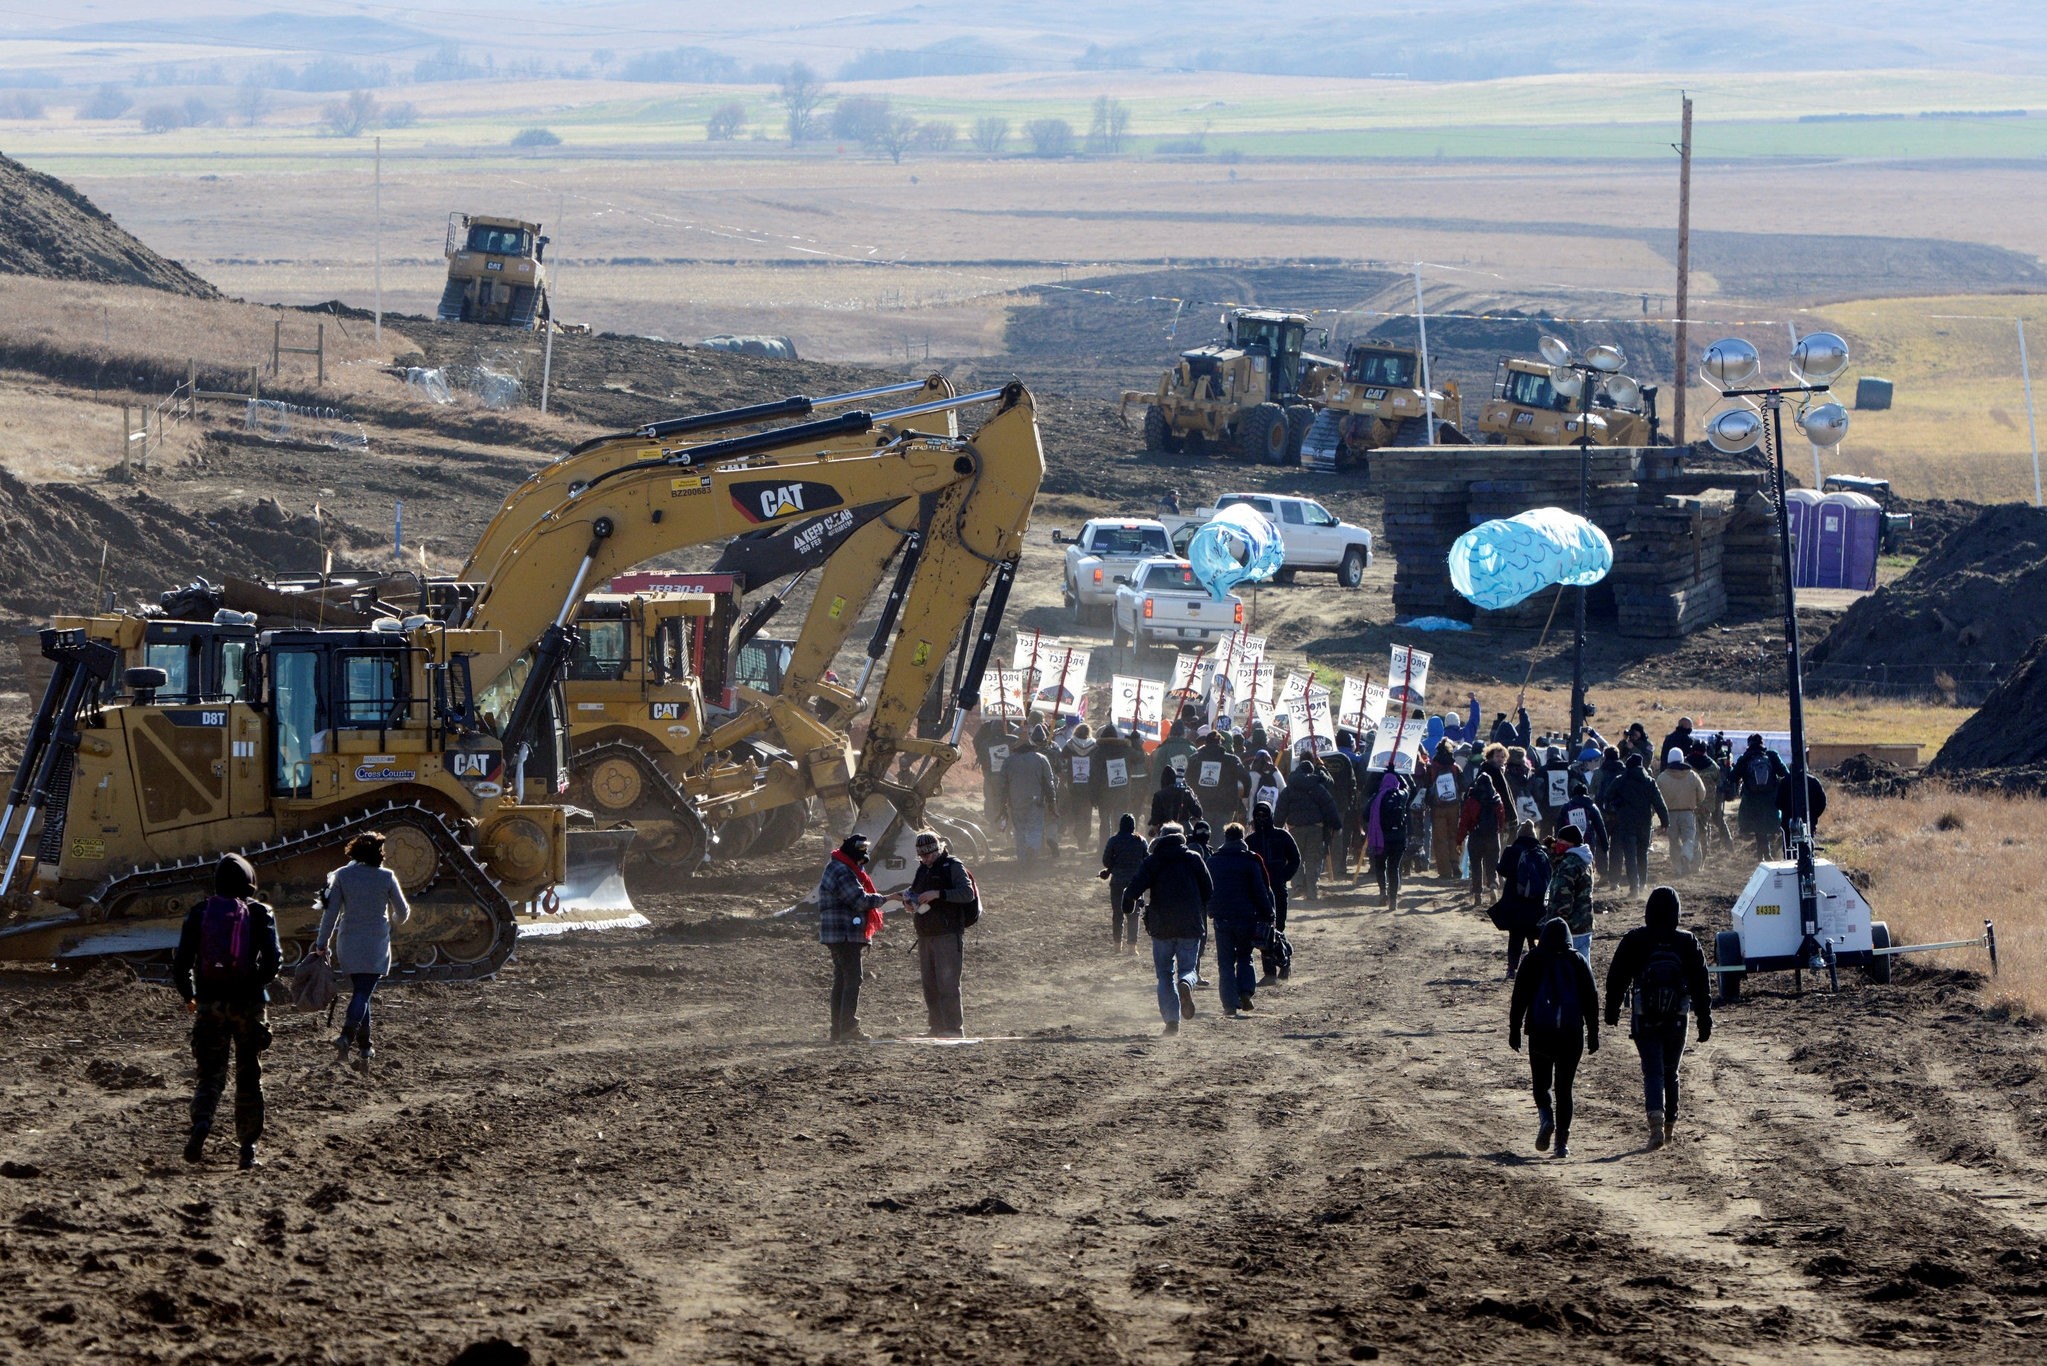  Protesters march along the pipeline route during a protest against the Dakota Access pipeline near the Standing Rock Indian Reservation. (REUTERS Photo)